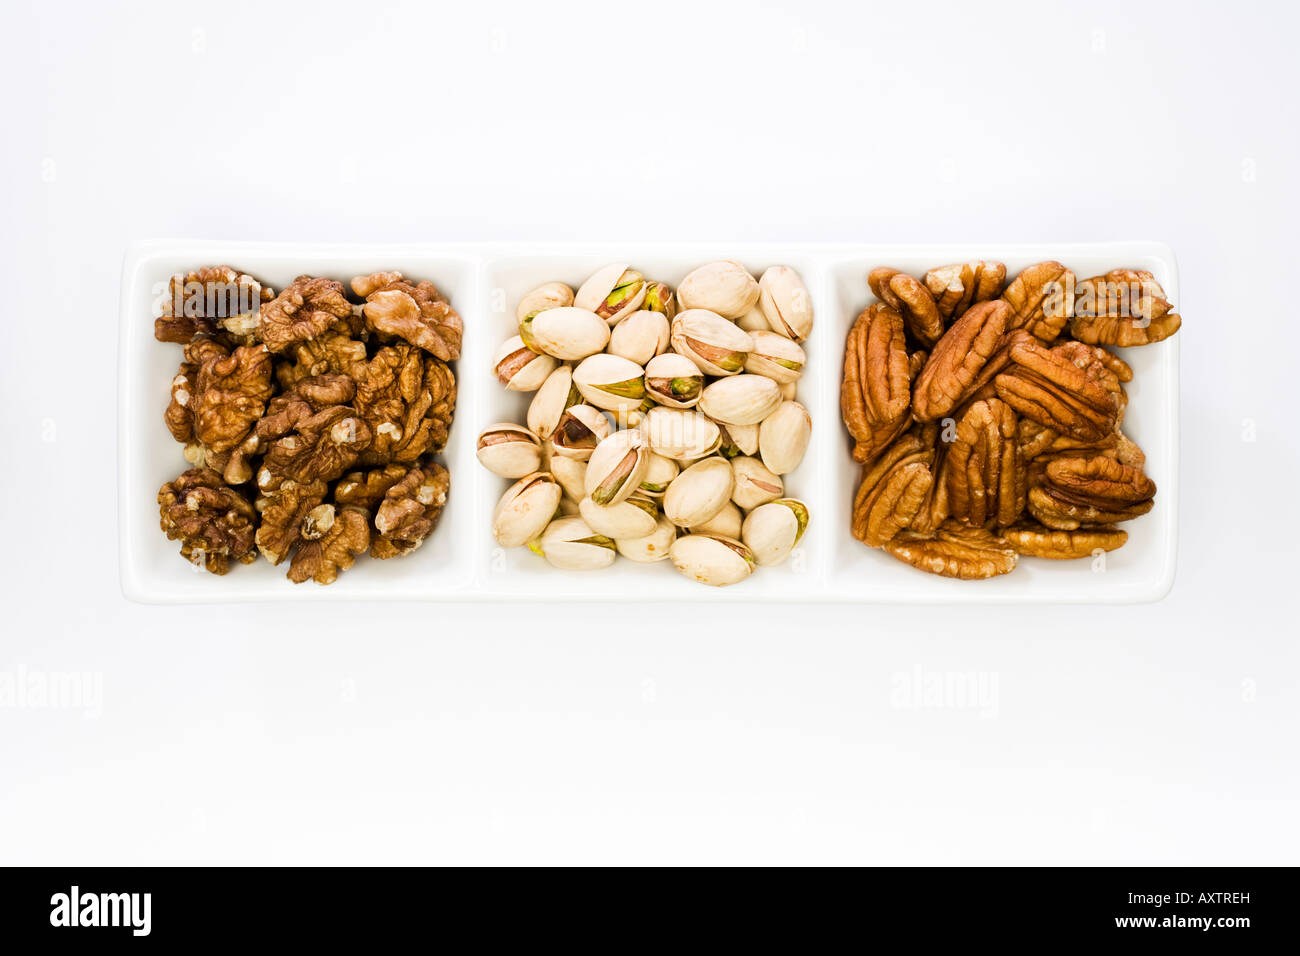 Three types of nut kernel Shelled Walnuts Pistachios and Pecans Stock Photo